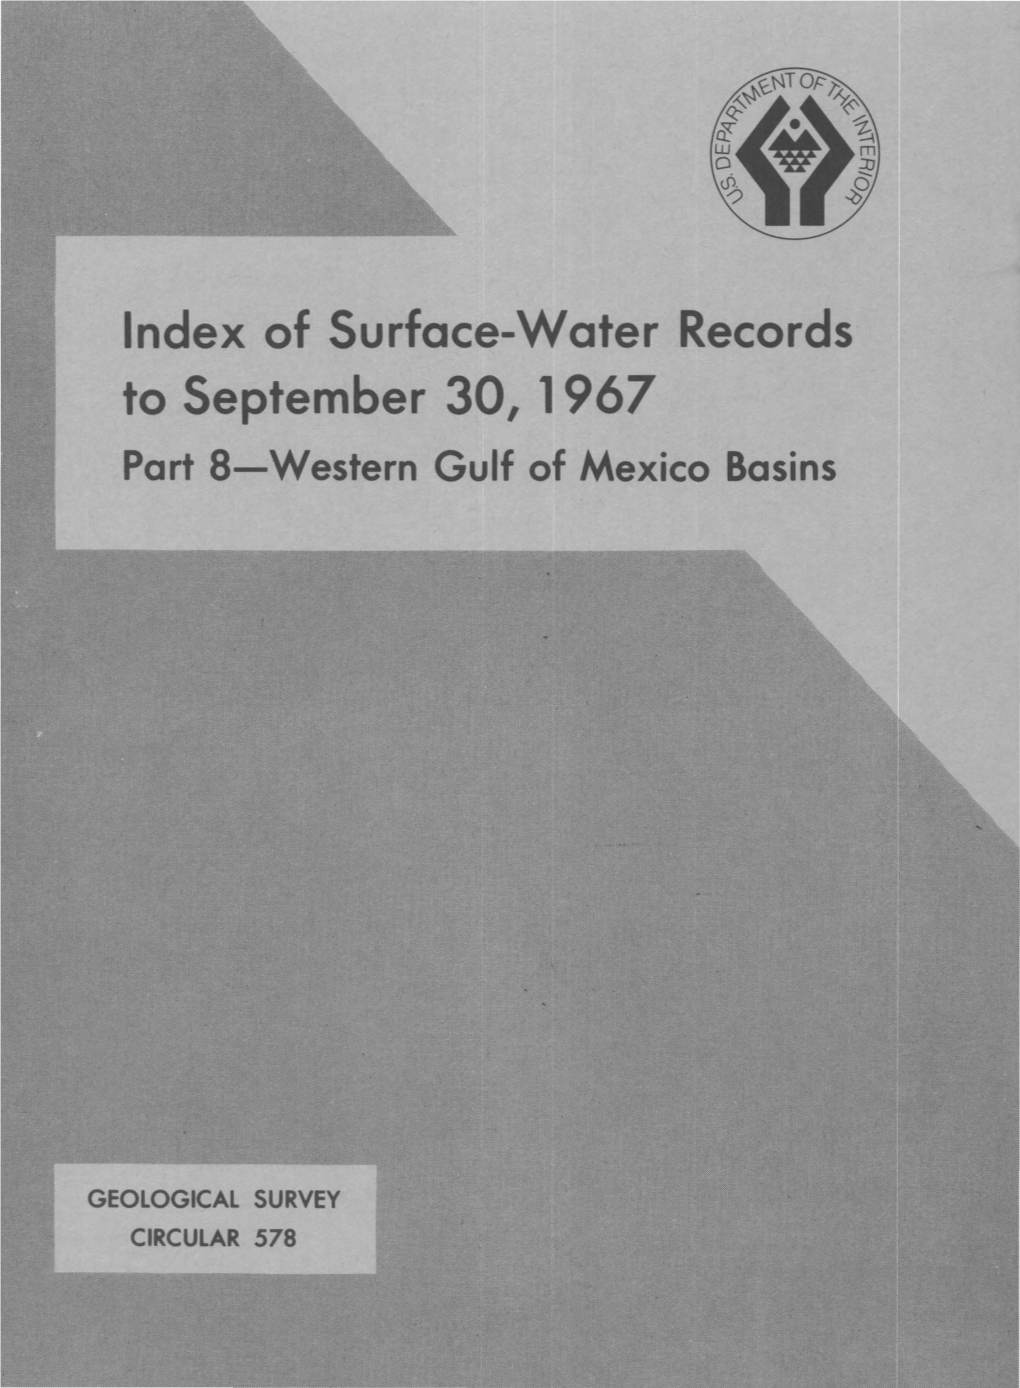 Index of Surface-Water Records to September 30, 1967 Part 8-Western Gulf of Mexico Basins